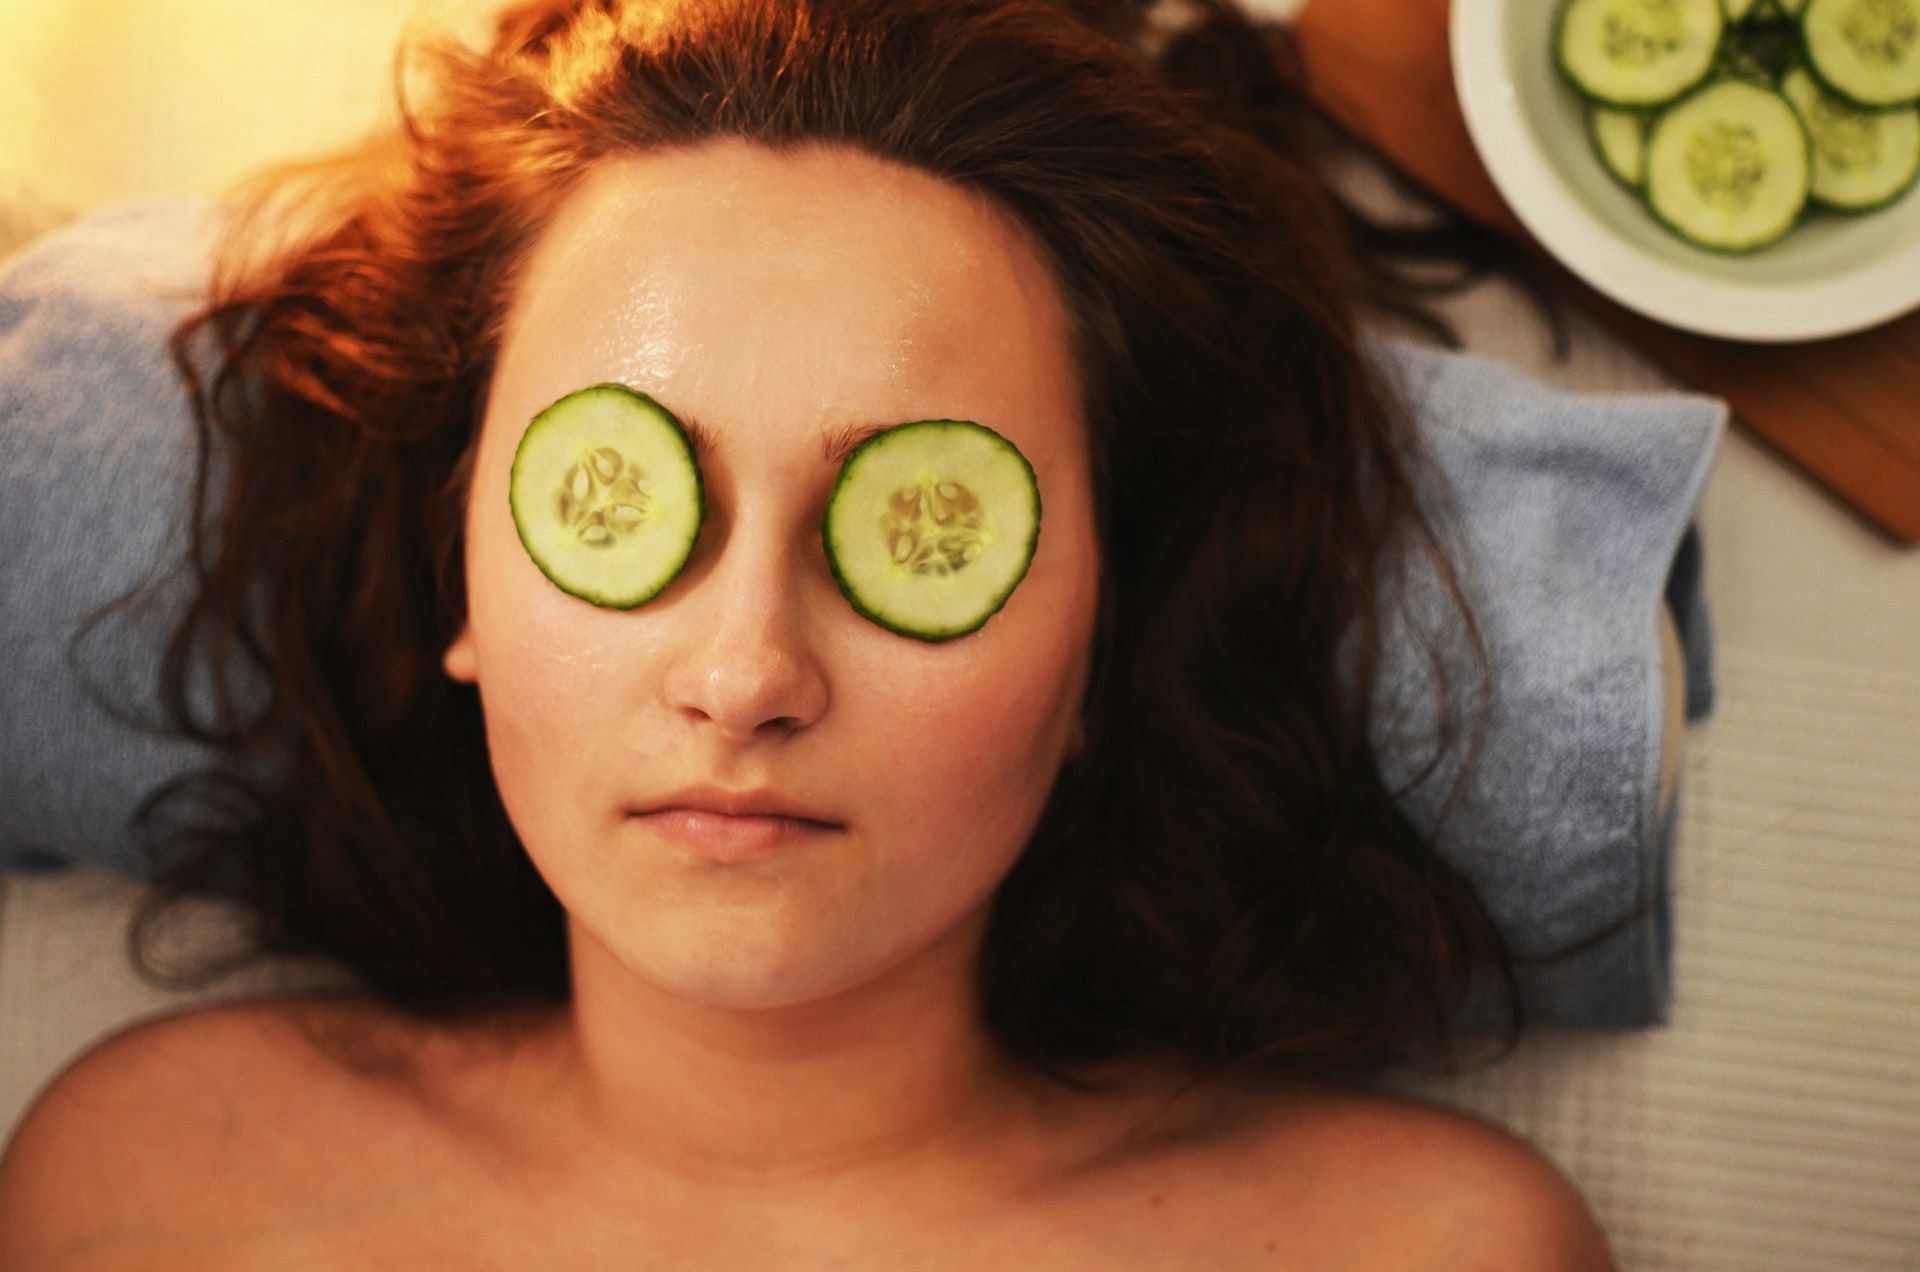 Cucumbers prevent acne and blemishes and promotes healthy skin. (Photo by Breakingpic via pexels)